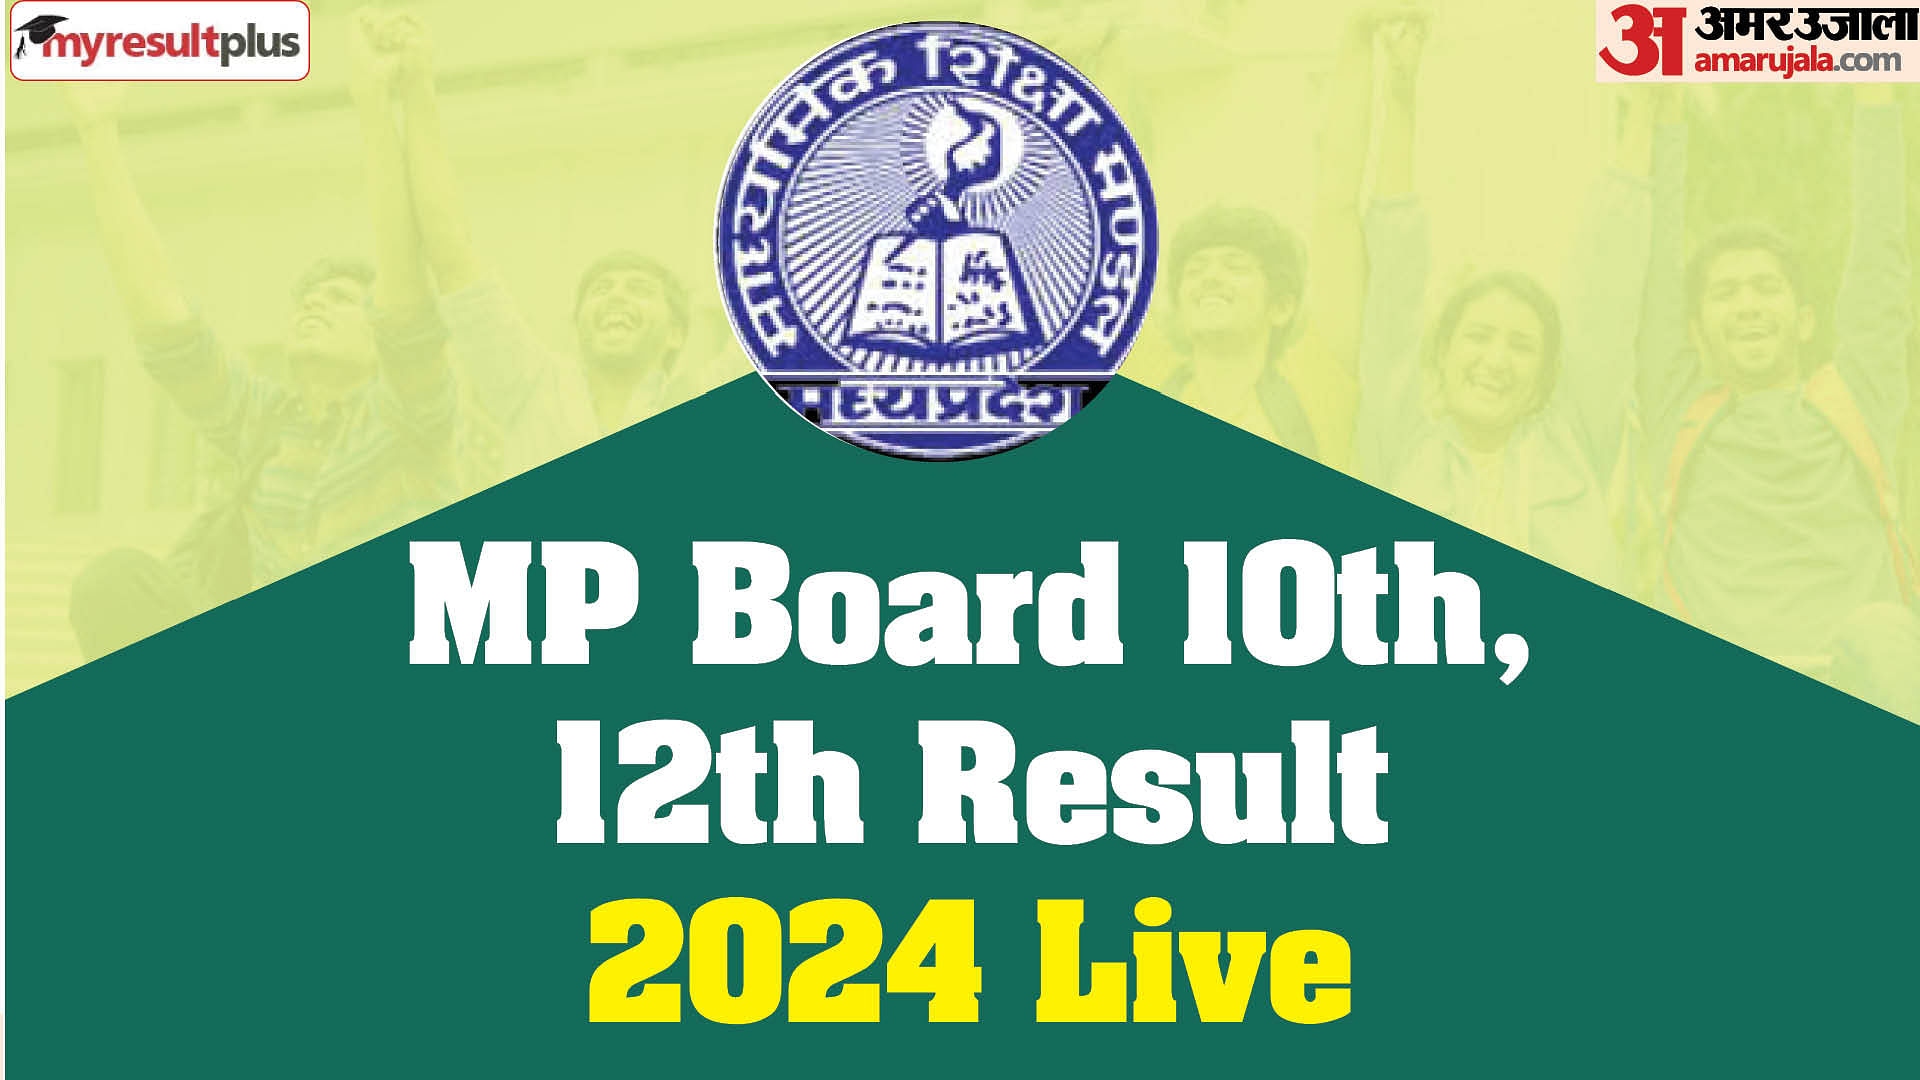 MP Board class 10, 12 result out now, Check latest updates at results.amarujala.com